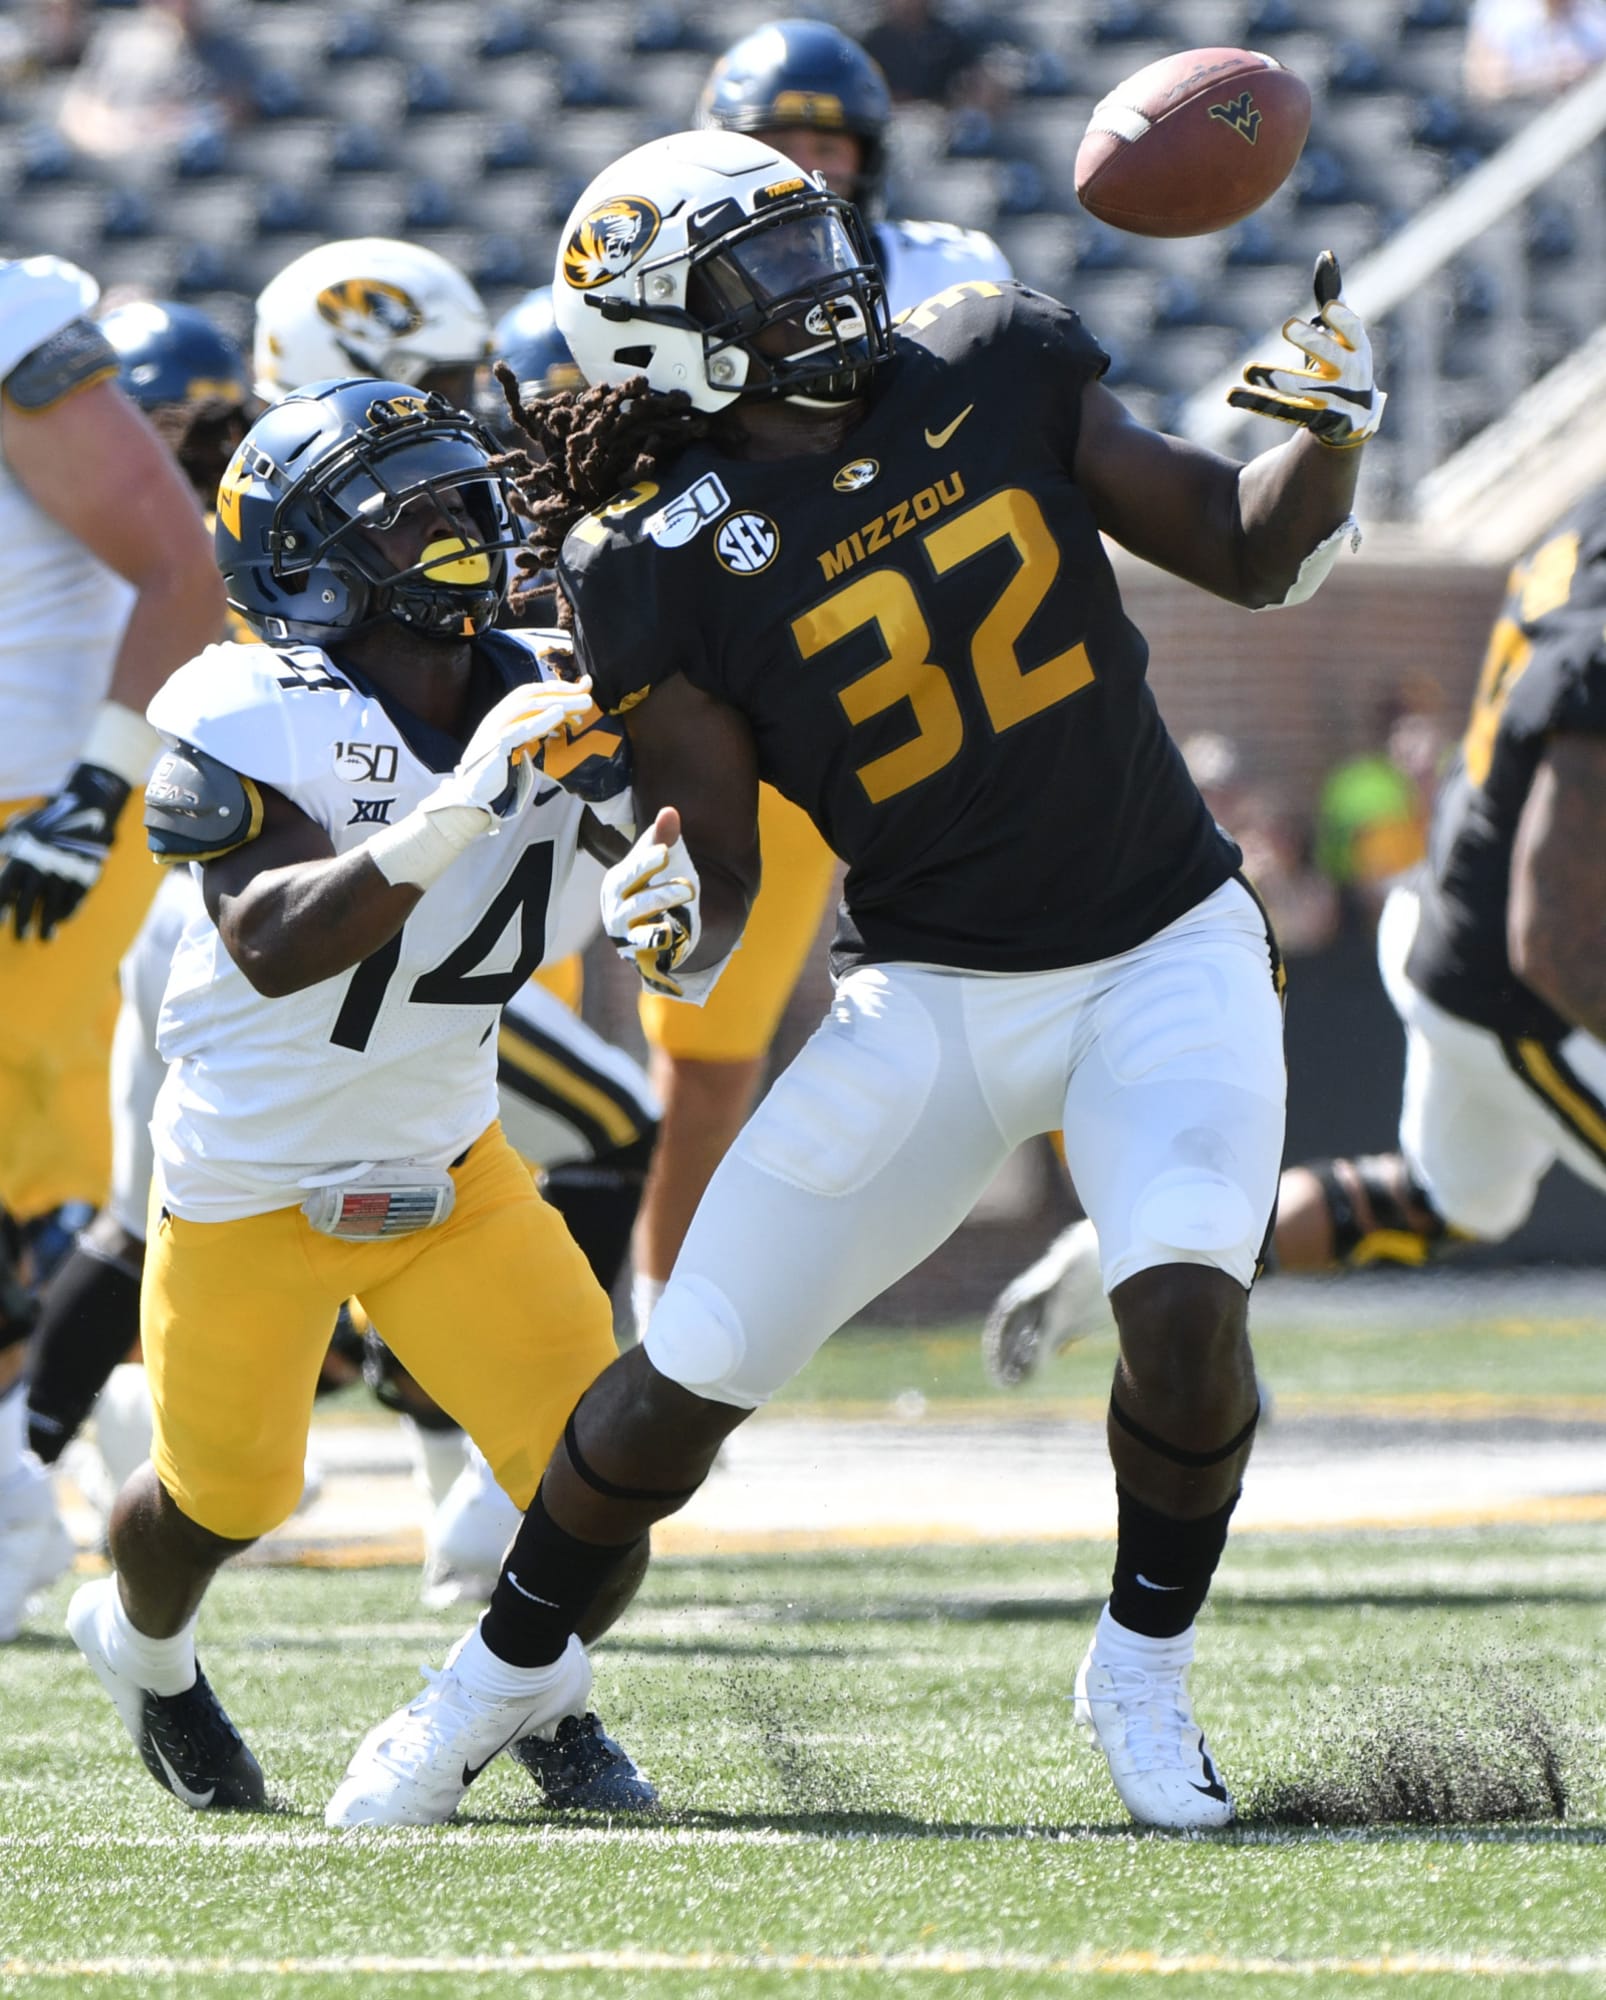 Mizzou defense answers at home, redeems itself in home opener